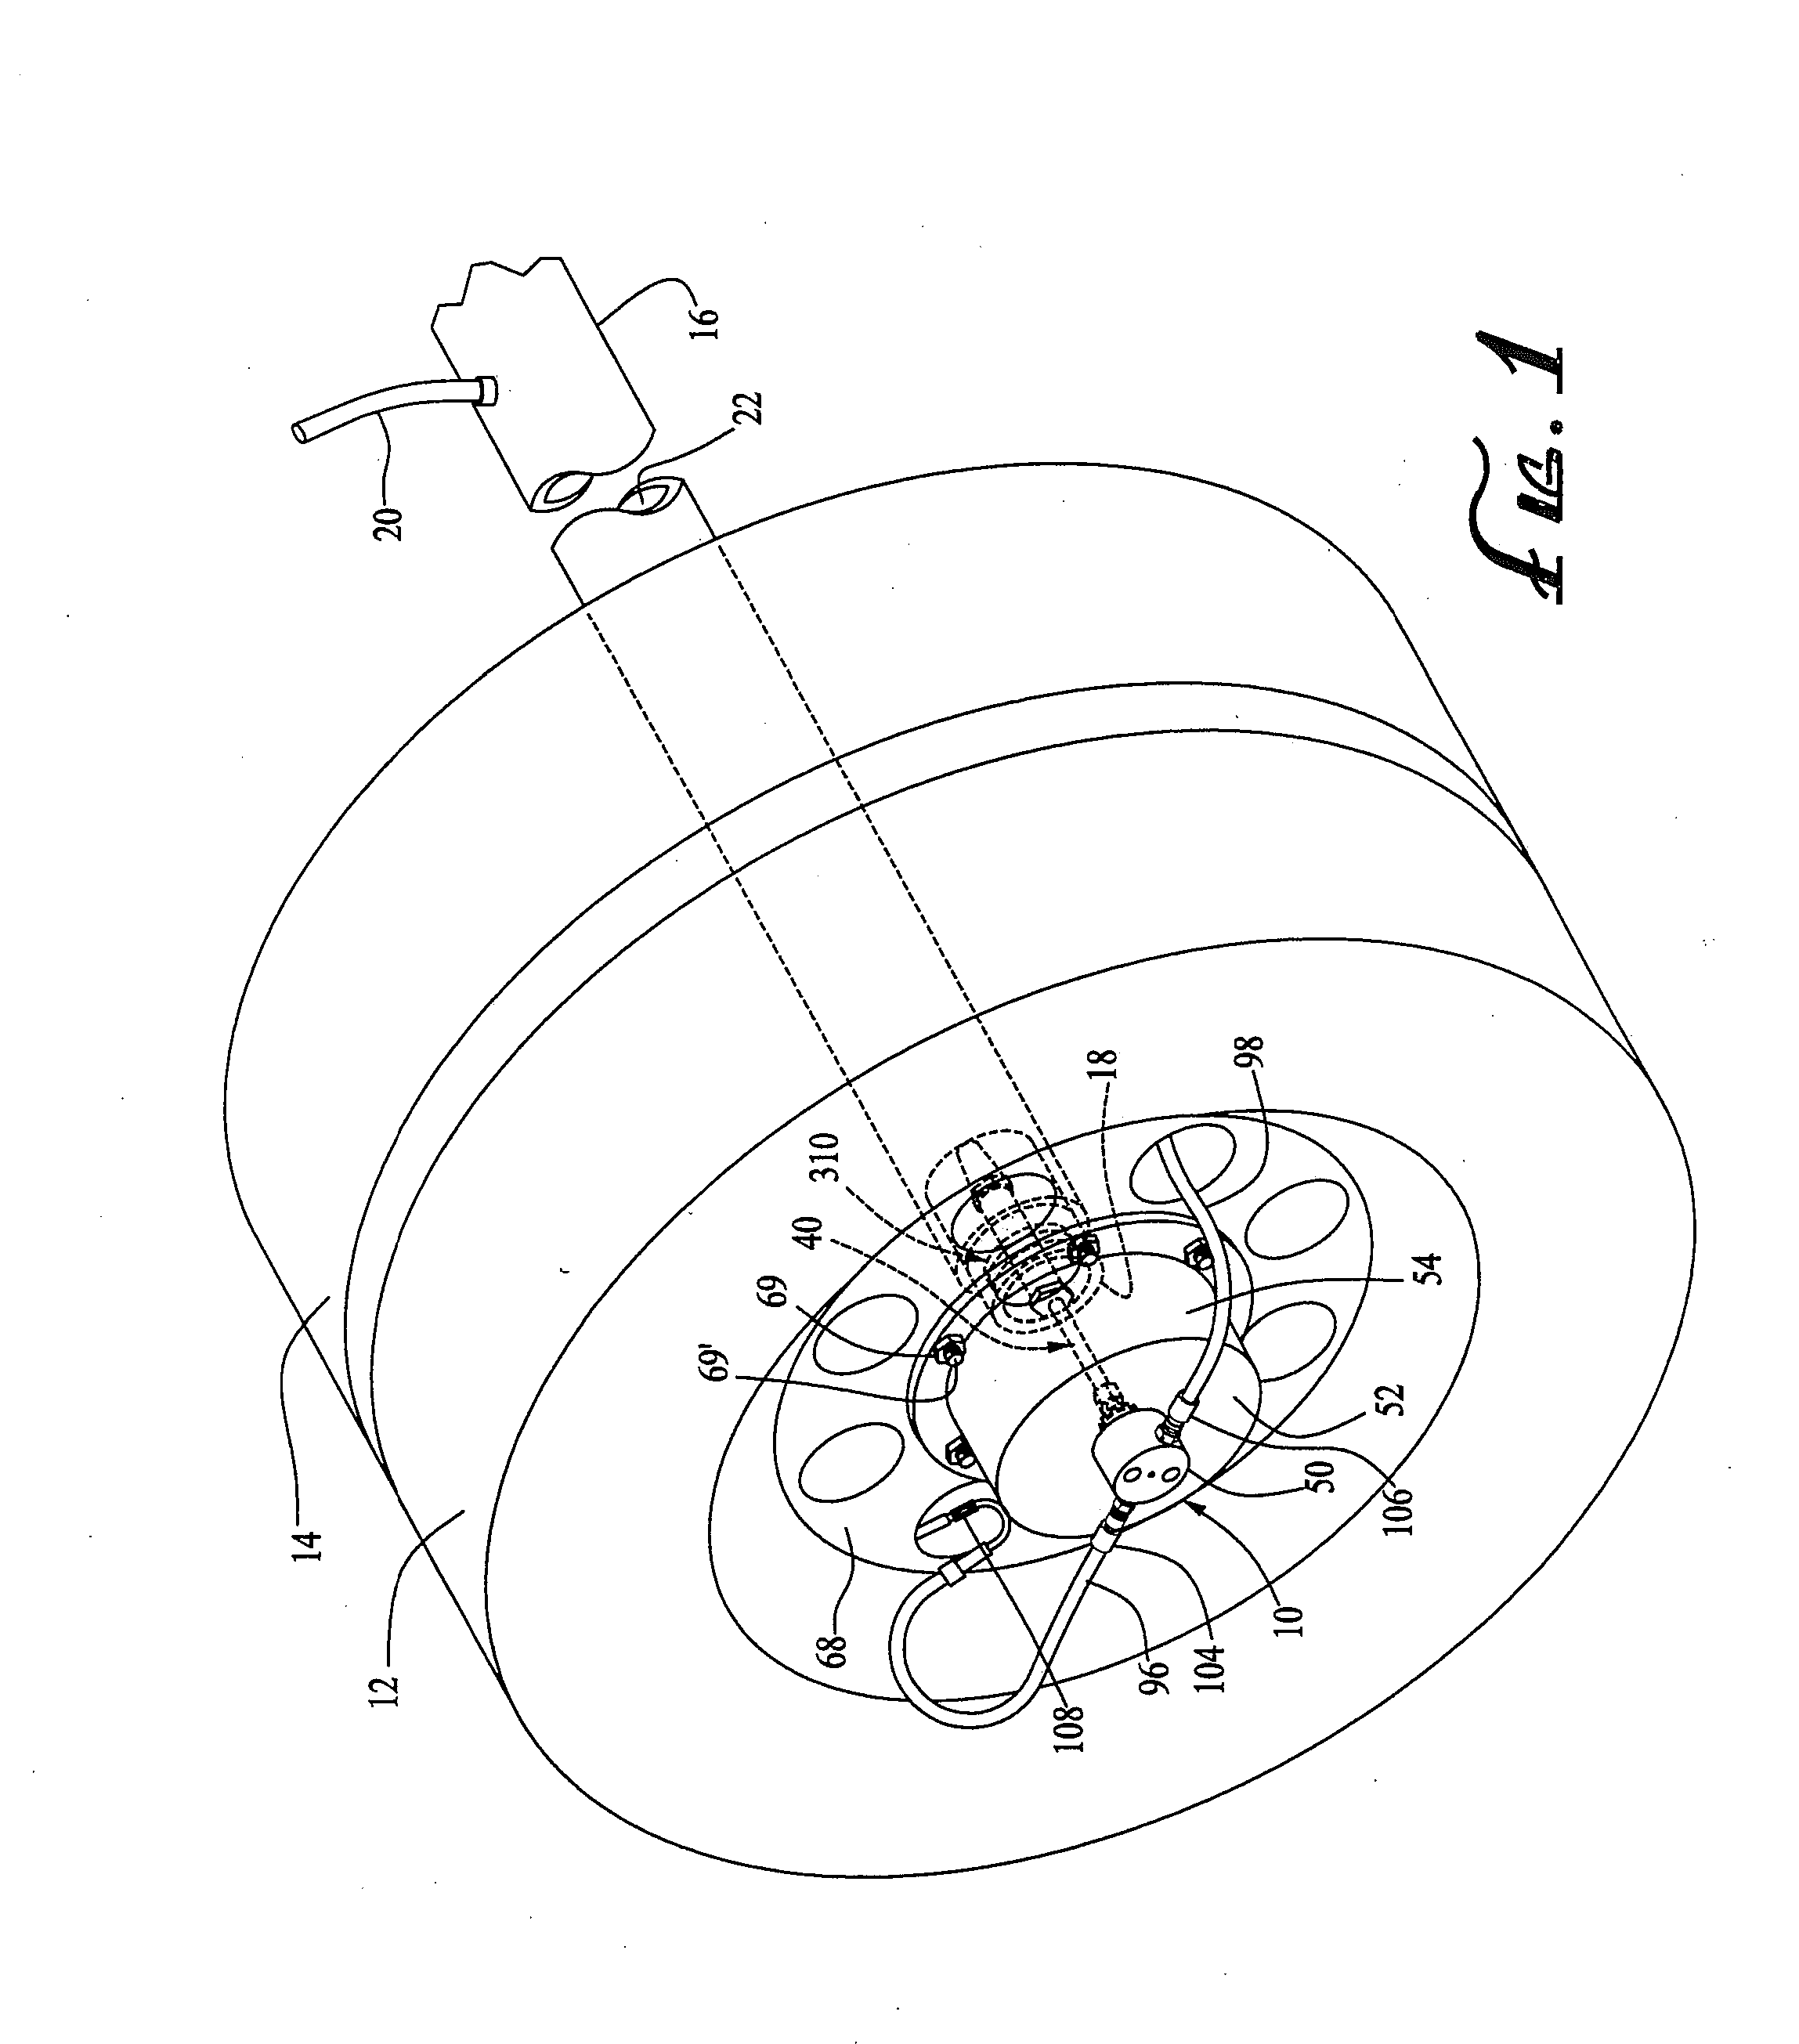 Rotary Union Assembly For Use In Air Pressure Inflation Systems For Tractor Trailer Tires